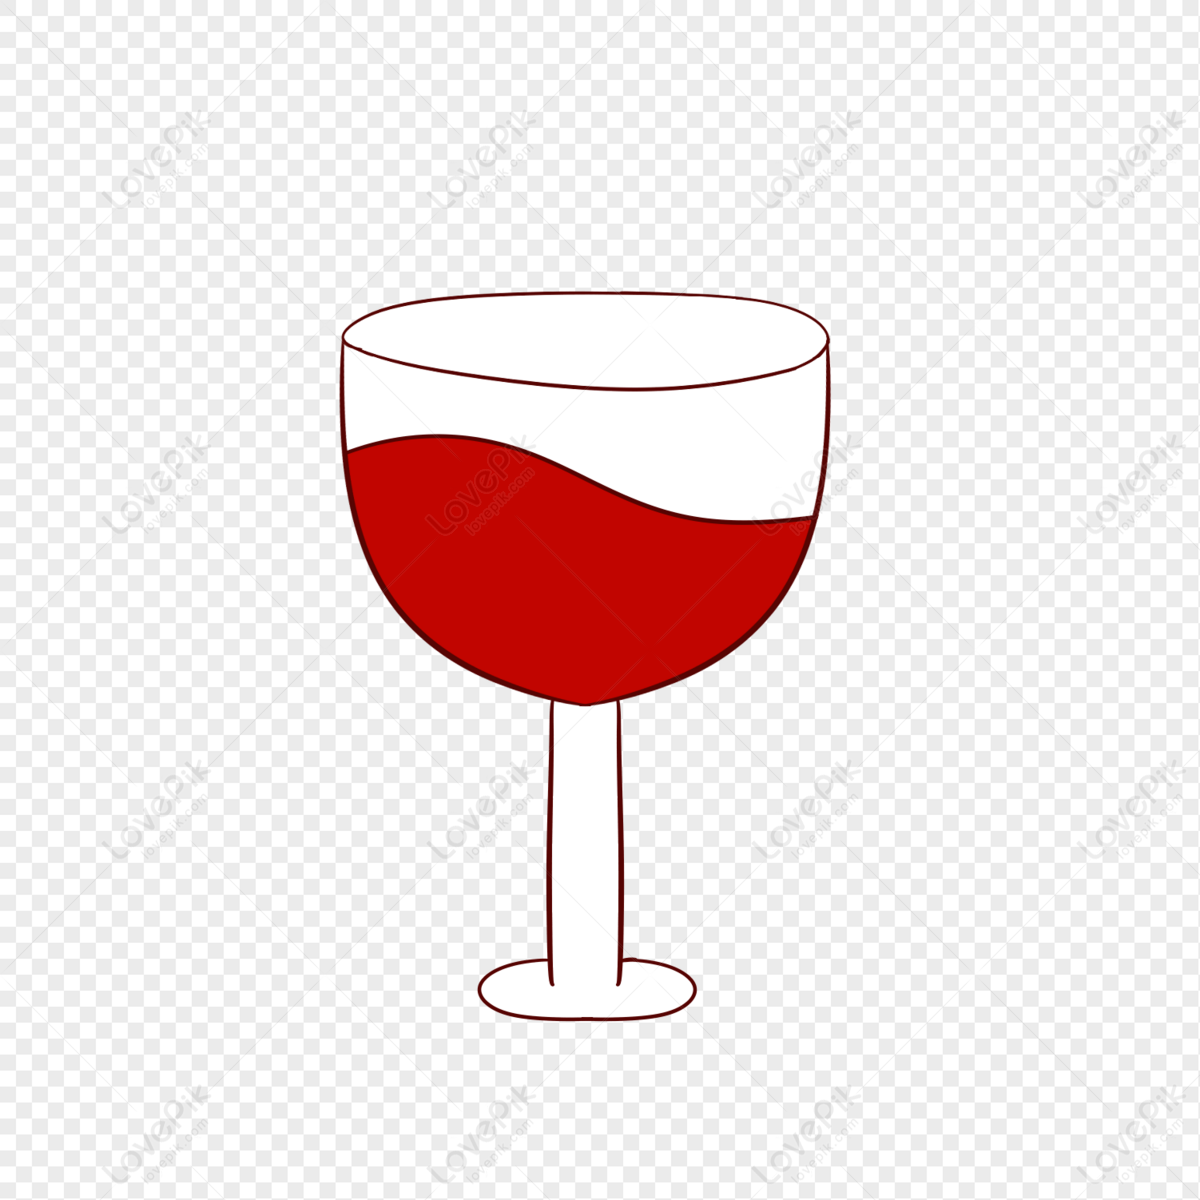 Hand Painted Cartoon Red Wine Cup PNG Image And Clipart Image For Free  Download - Lovepik | 401103528